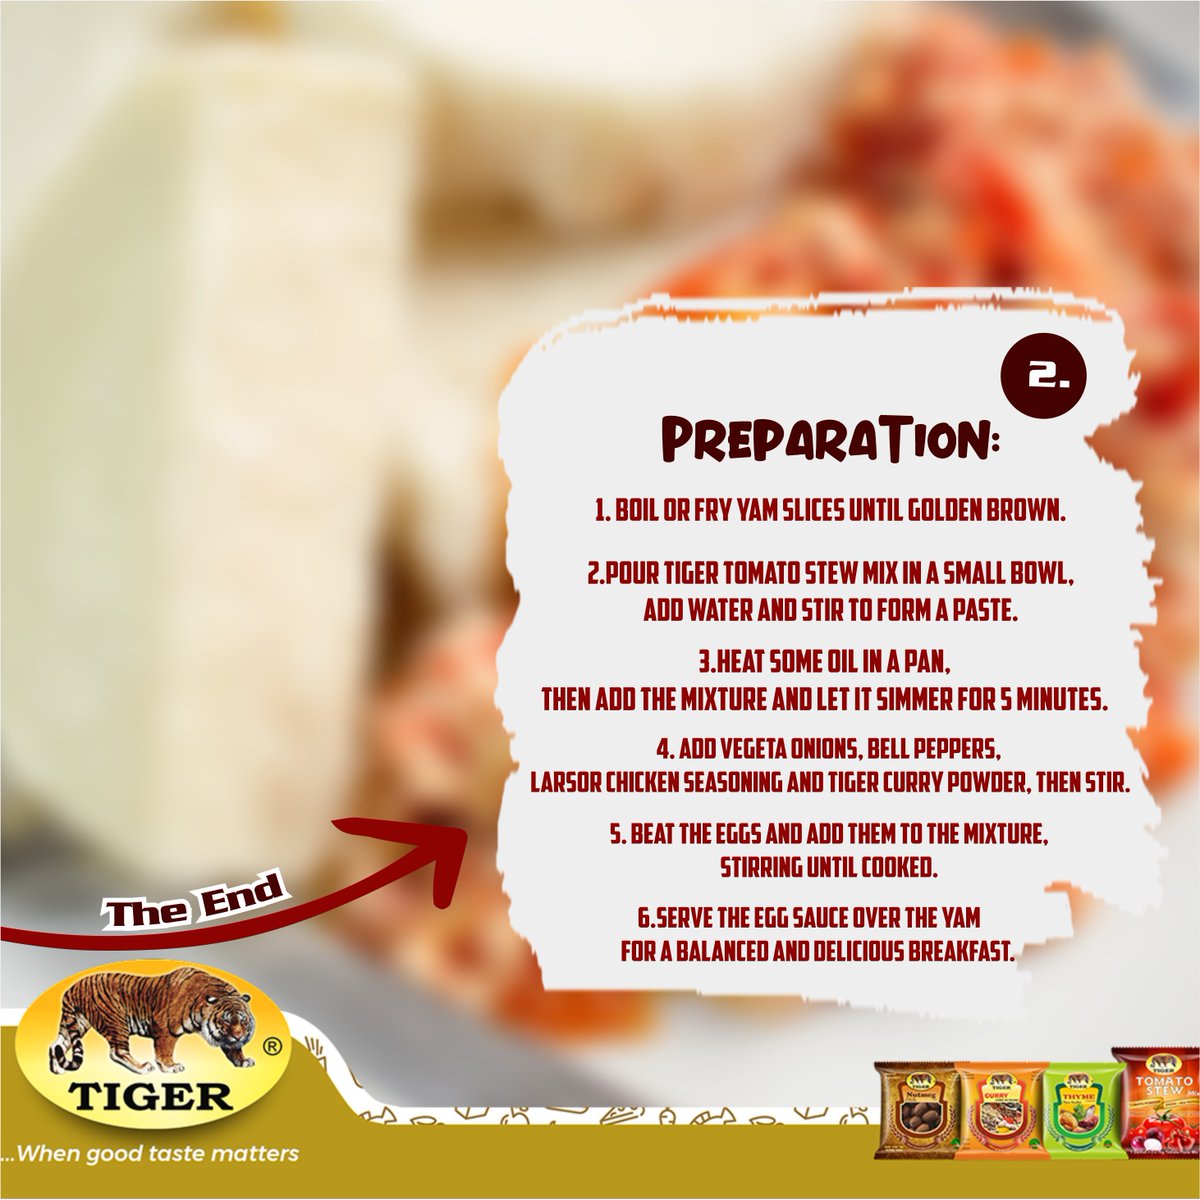 Weekends just got a whole lot tastier! Start today with our scrumptious quick, delicious, and oh-so-satisfying yam and egg sauce recipe.😋 Feel free to express your gratitude in the comments section. 

#TigerSpices #TigerFoods #WhenGoodTasteMatters #Yam #EggSauce